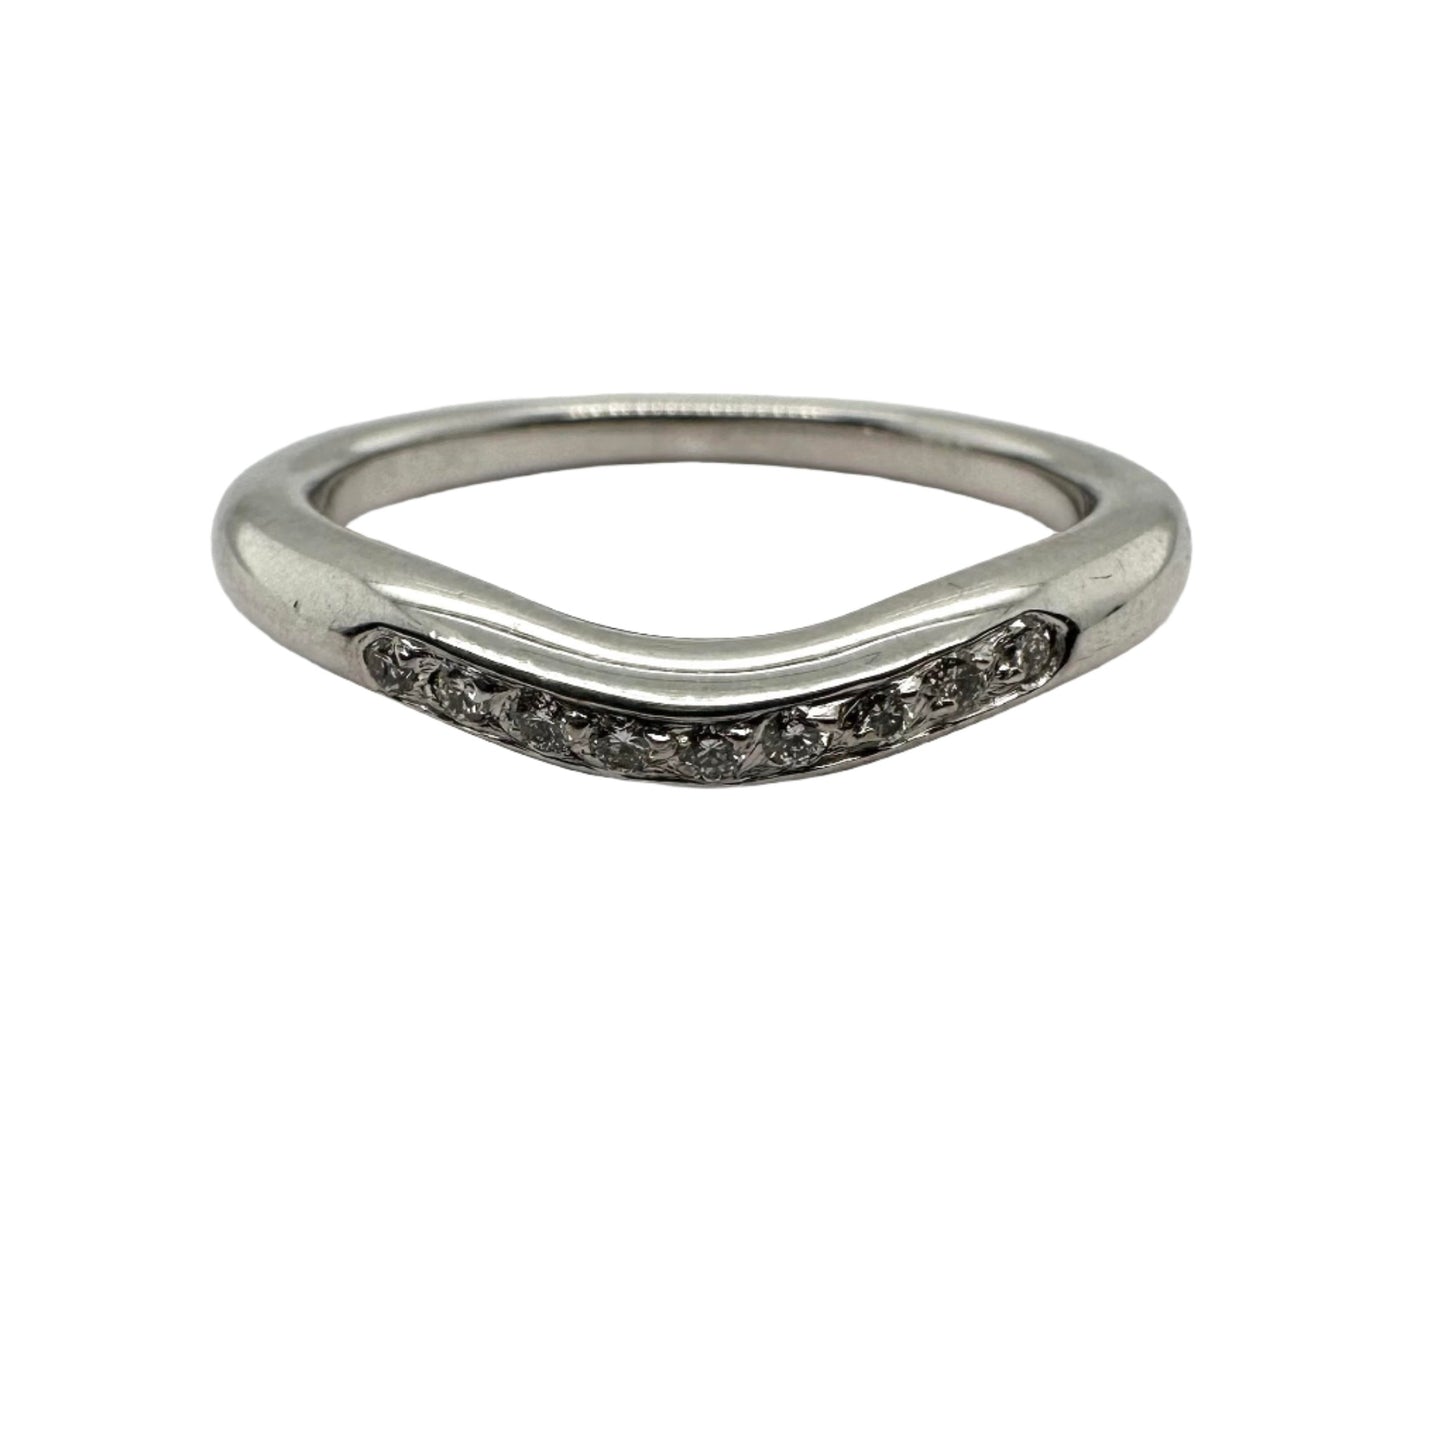 Luxurious 18ct white gold wedding band with diamond accents